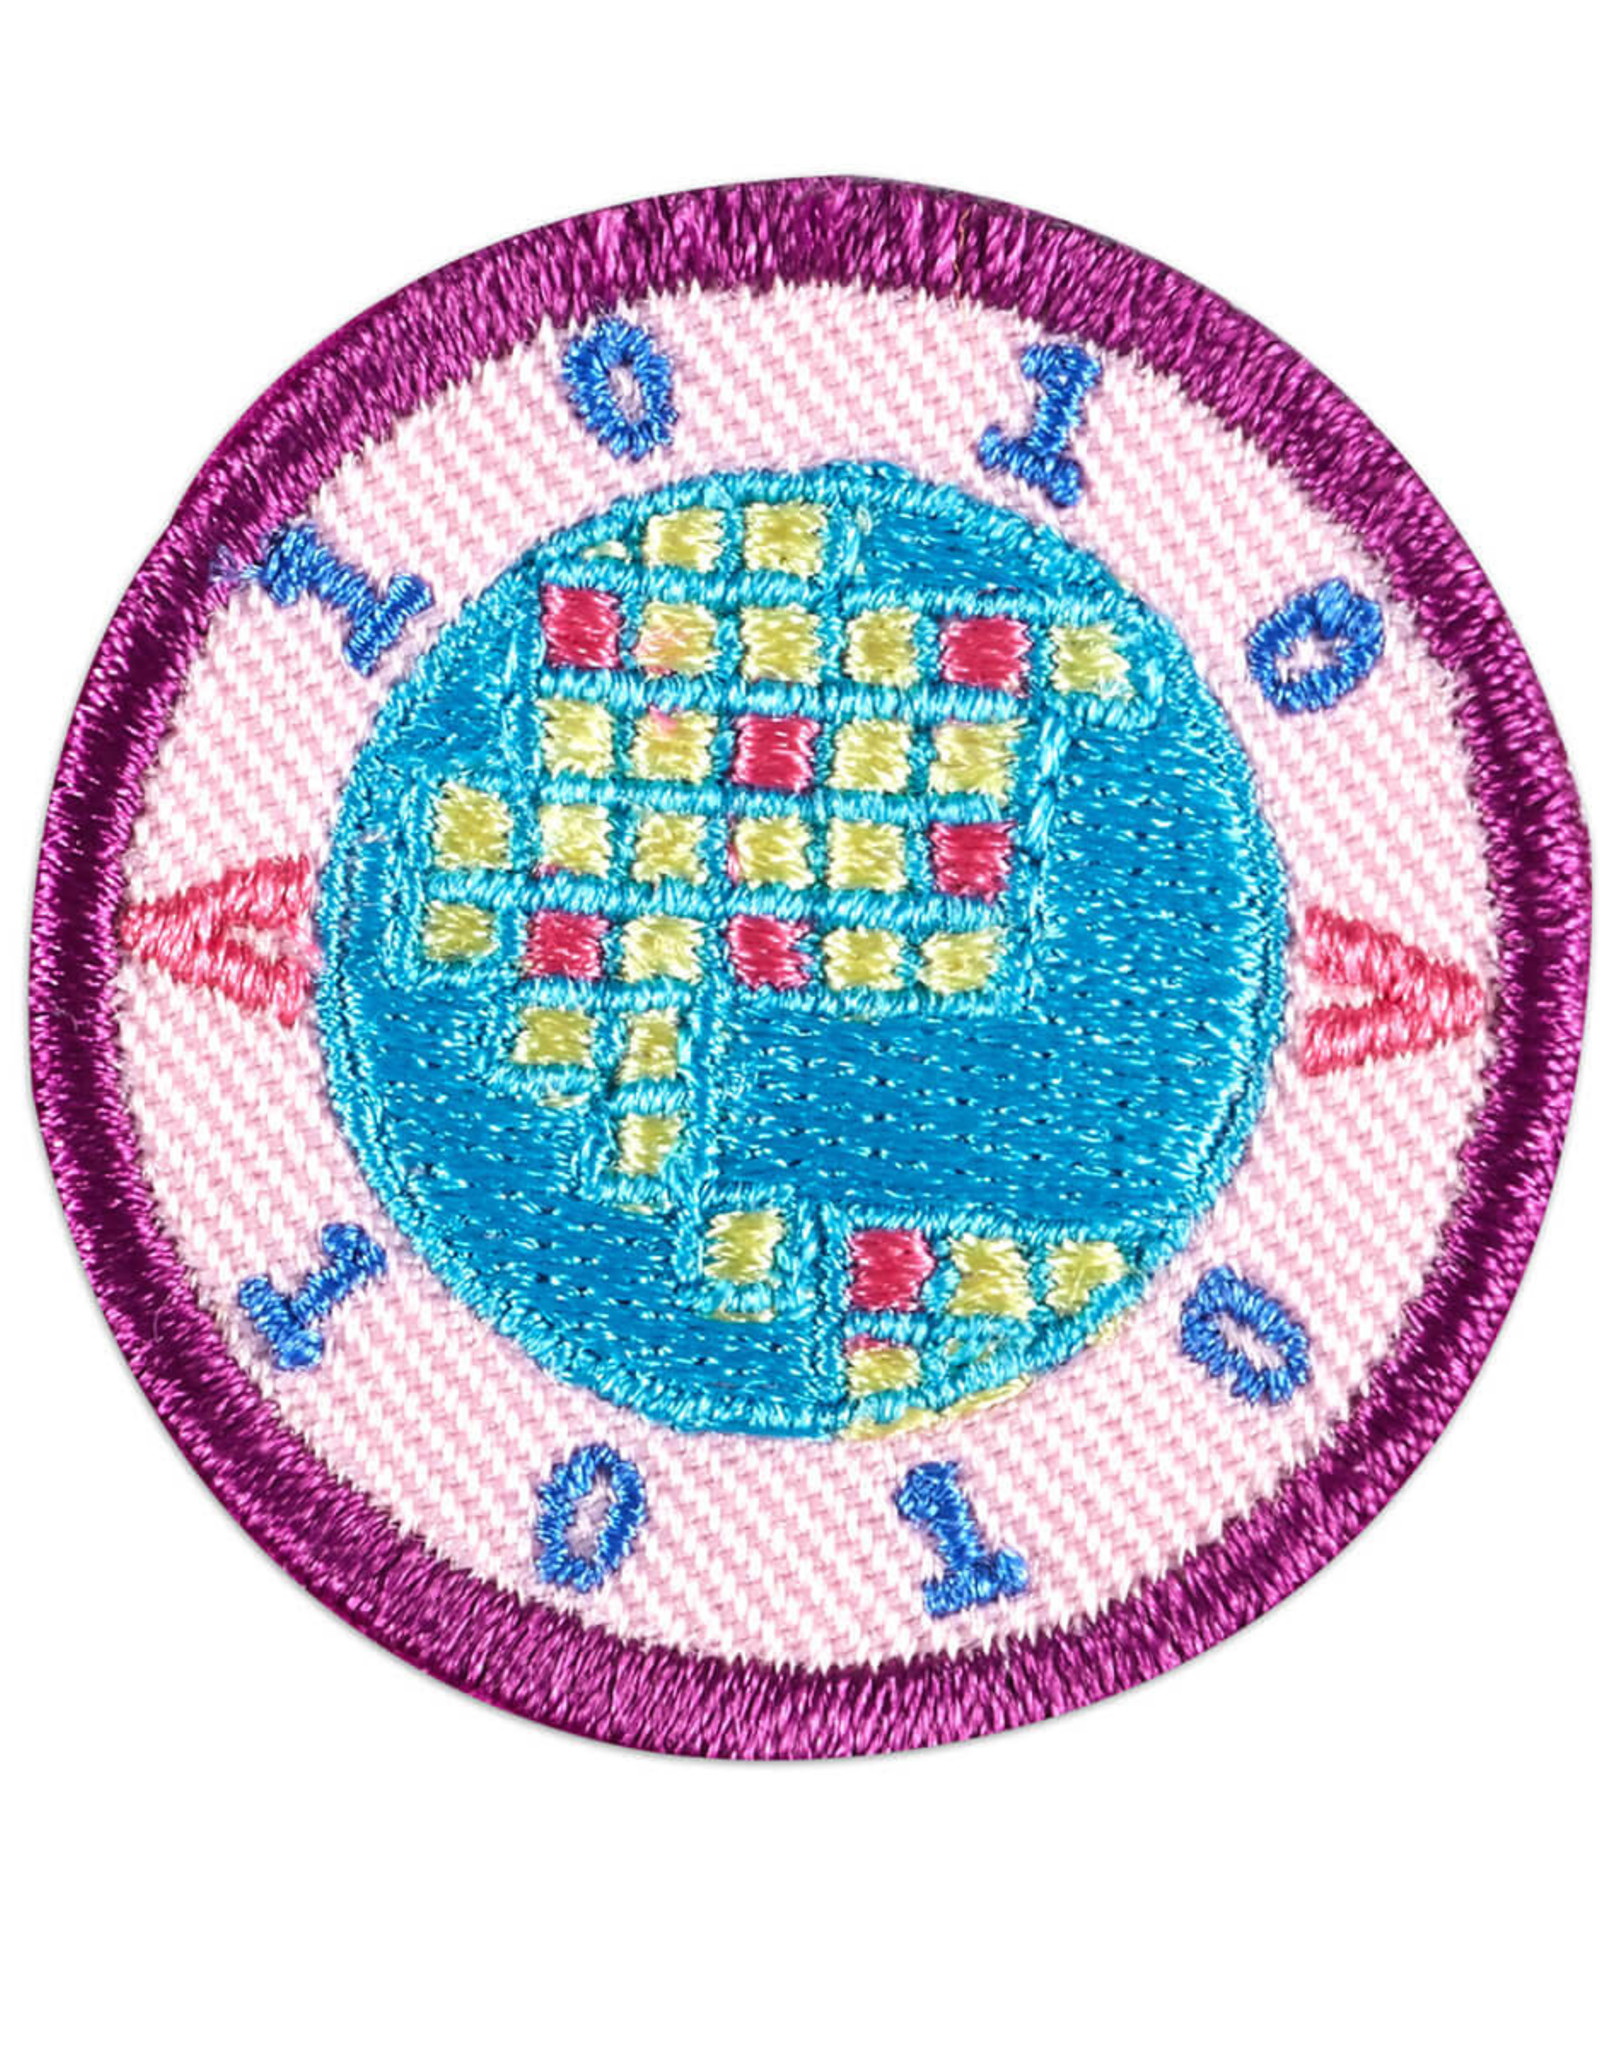 GIRL SCOUTS OF THE USA Junior Coding for Good 1: Coding Basics Badge